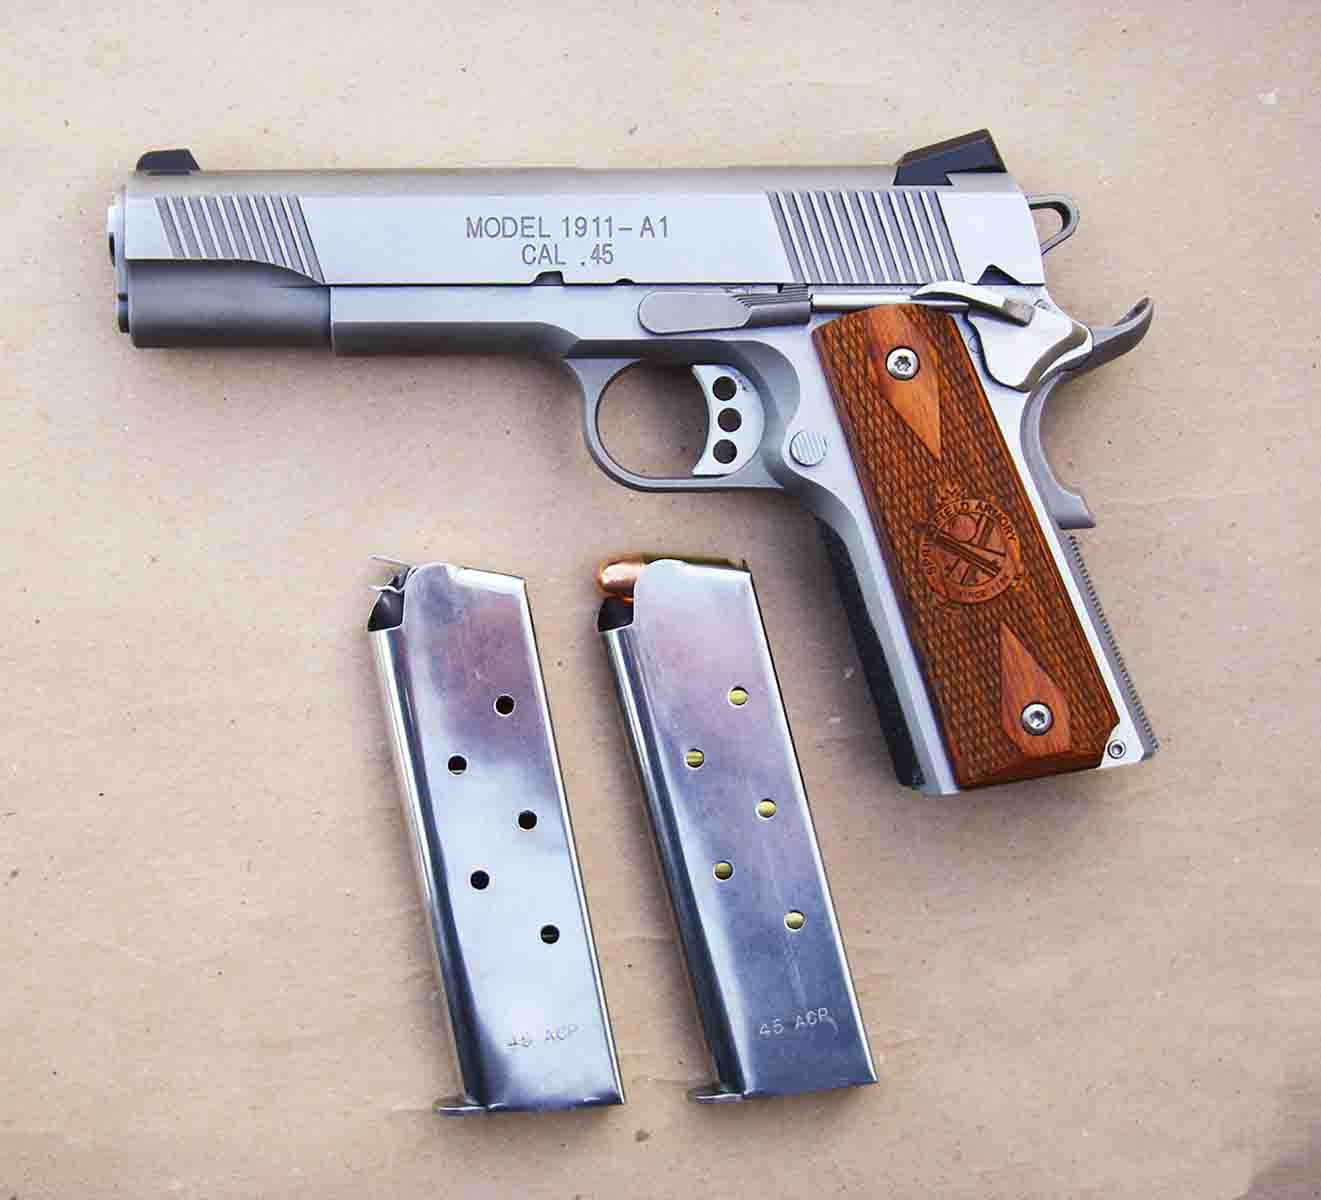 The 1911-A1 Loaded Stainless .45 ACP offers many desirable features, including two magazines.